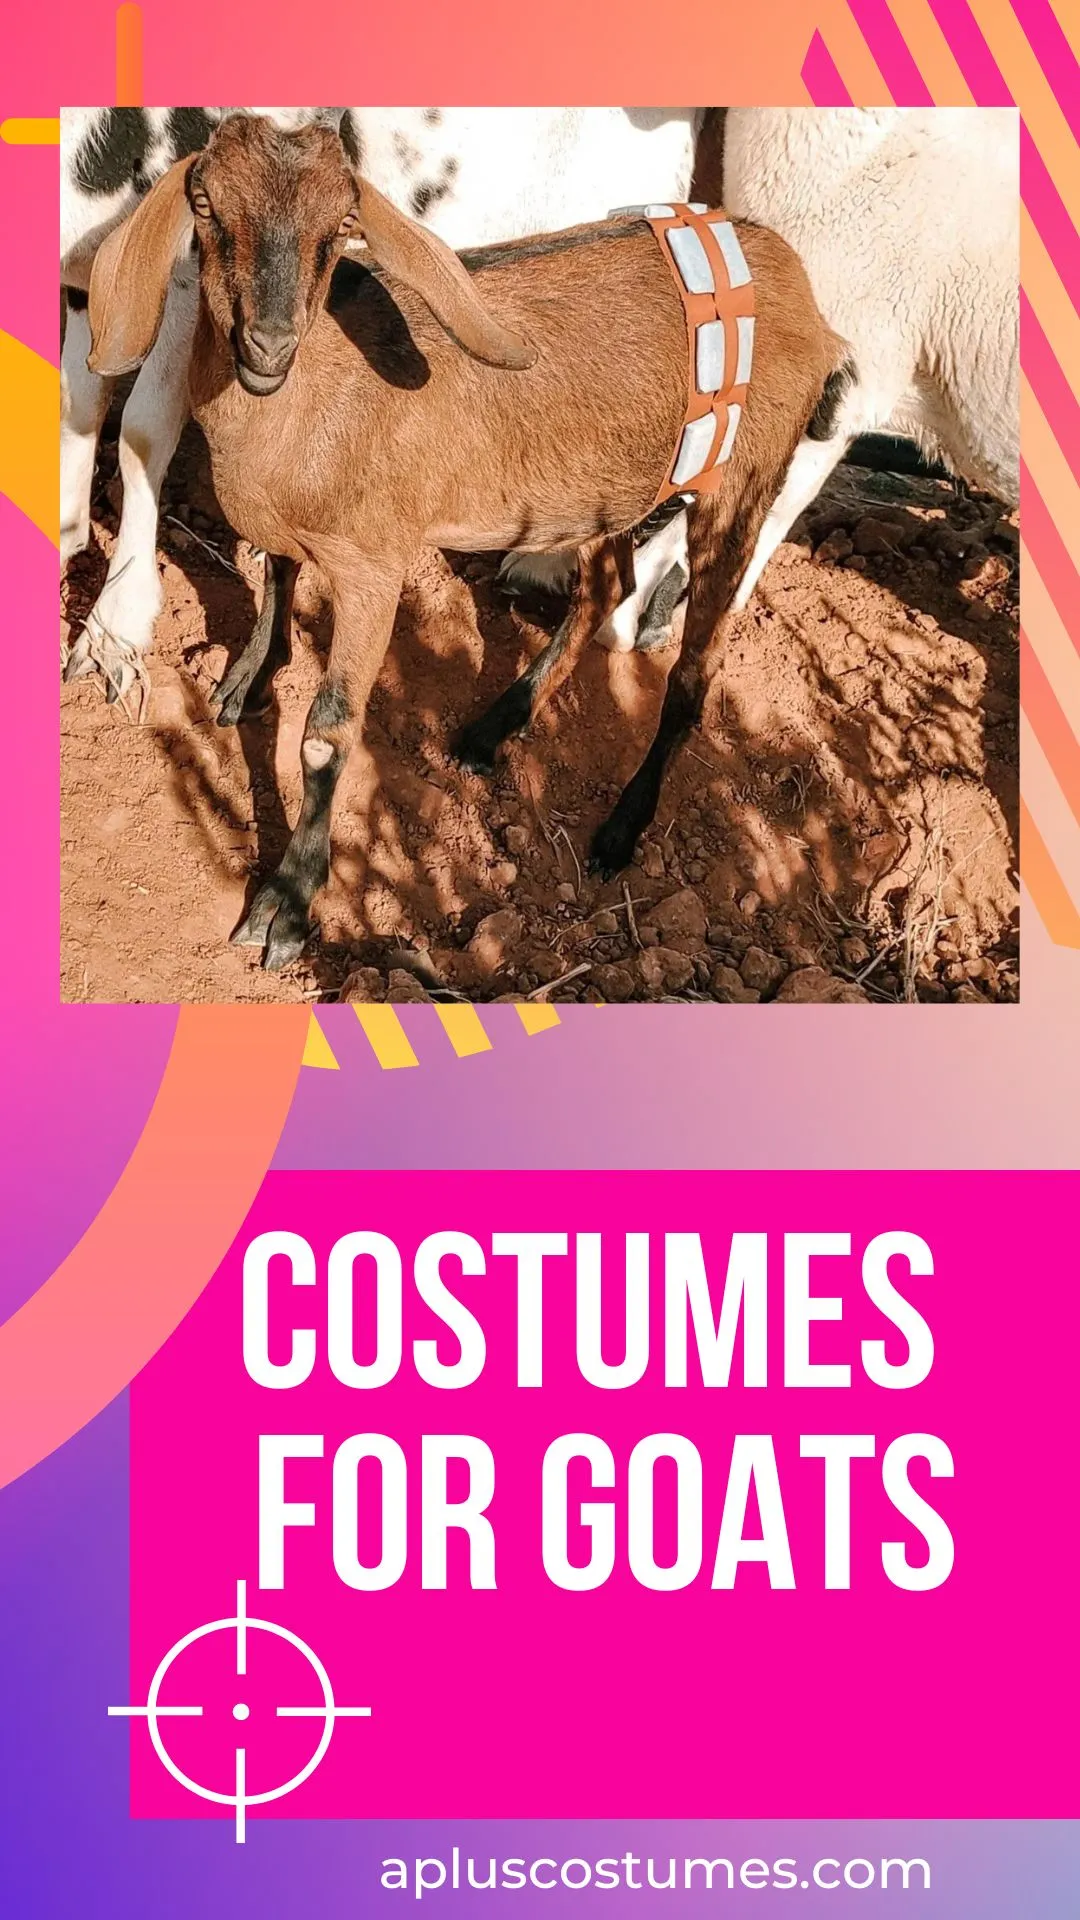 Best costumes for Goats by apluscostumes.com